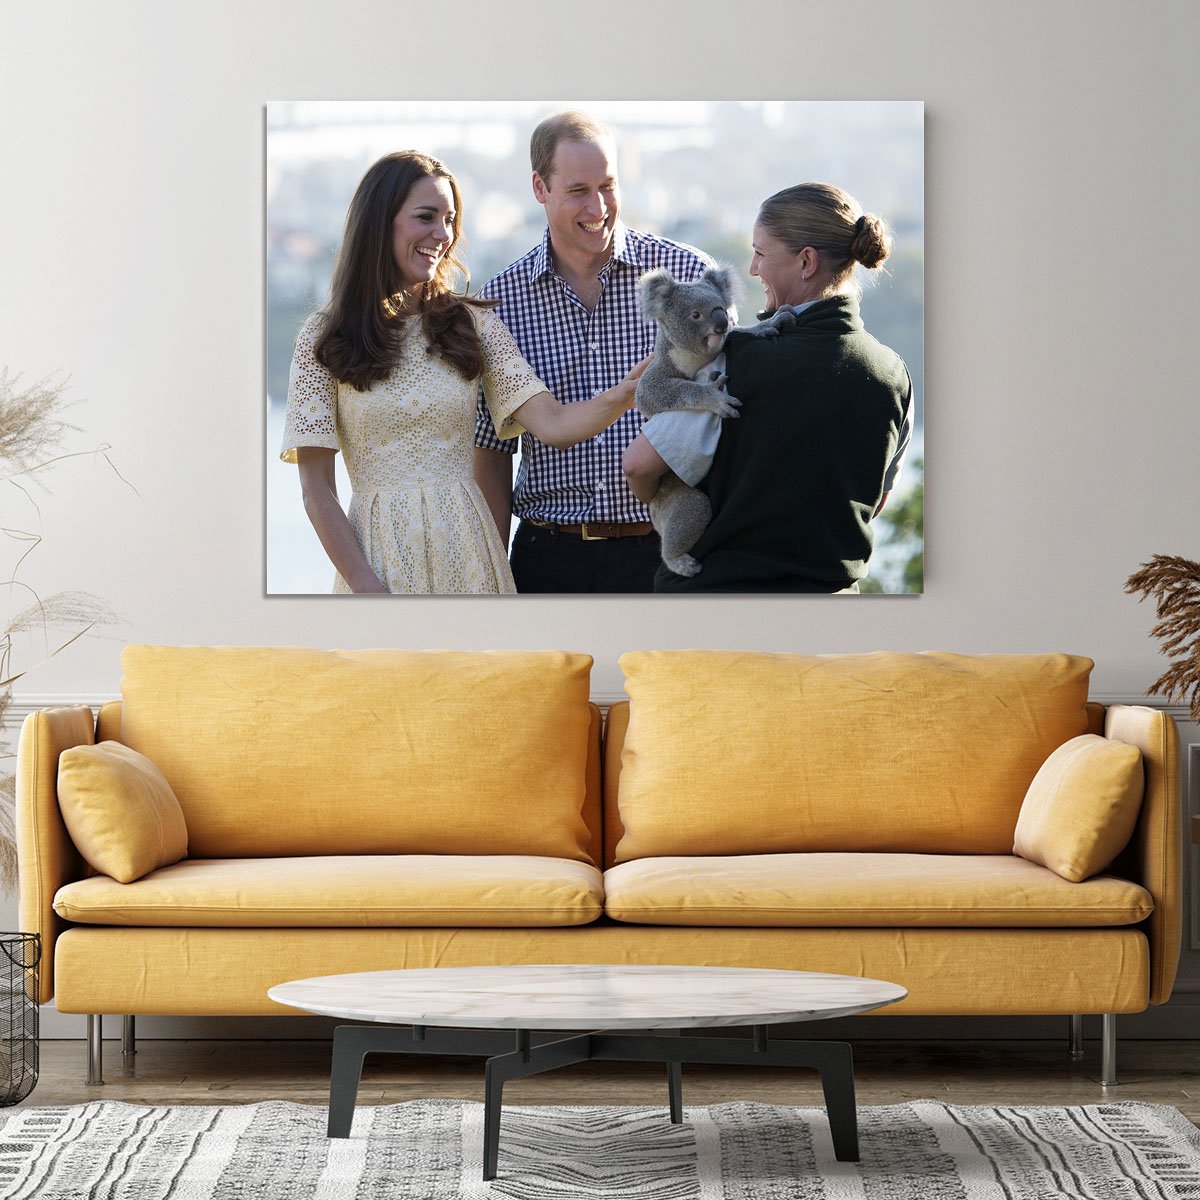 Prince William and Kate with a koala bear in Sydney Australia Canvas Print or Poster